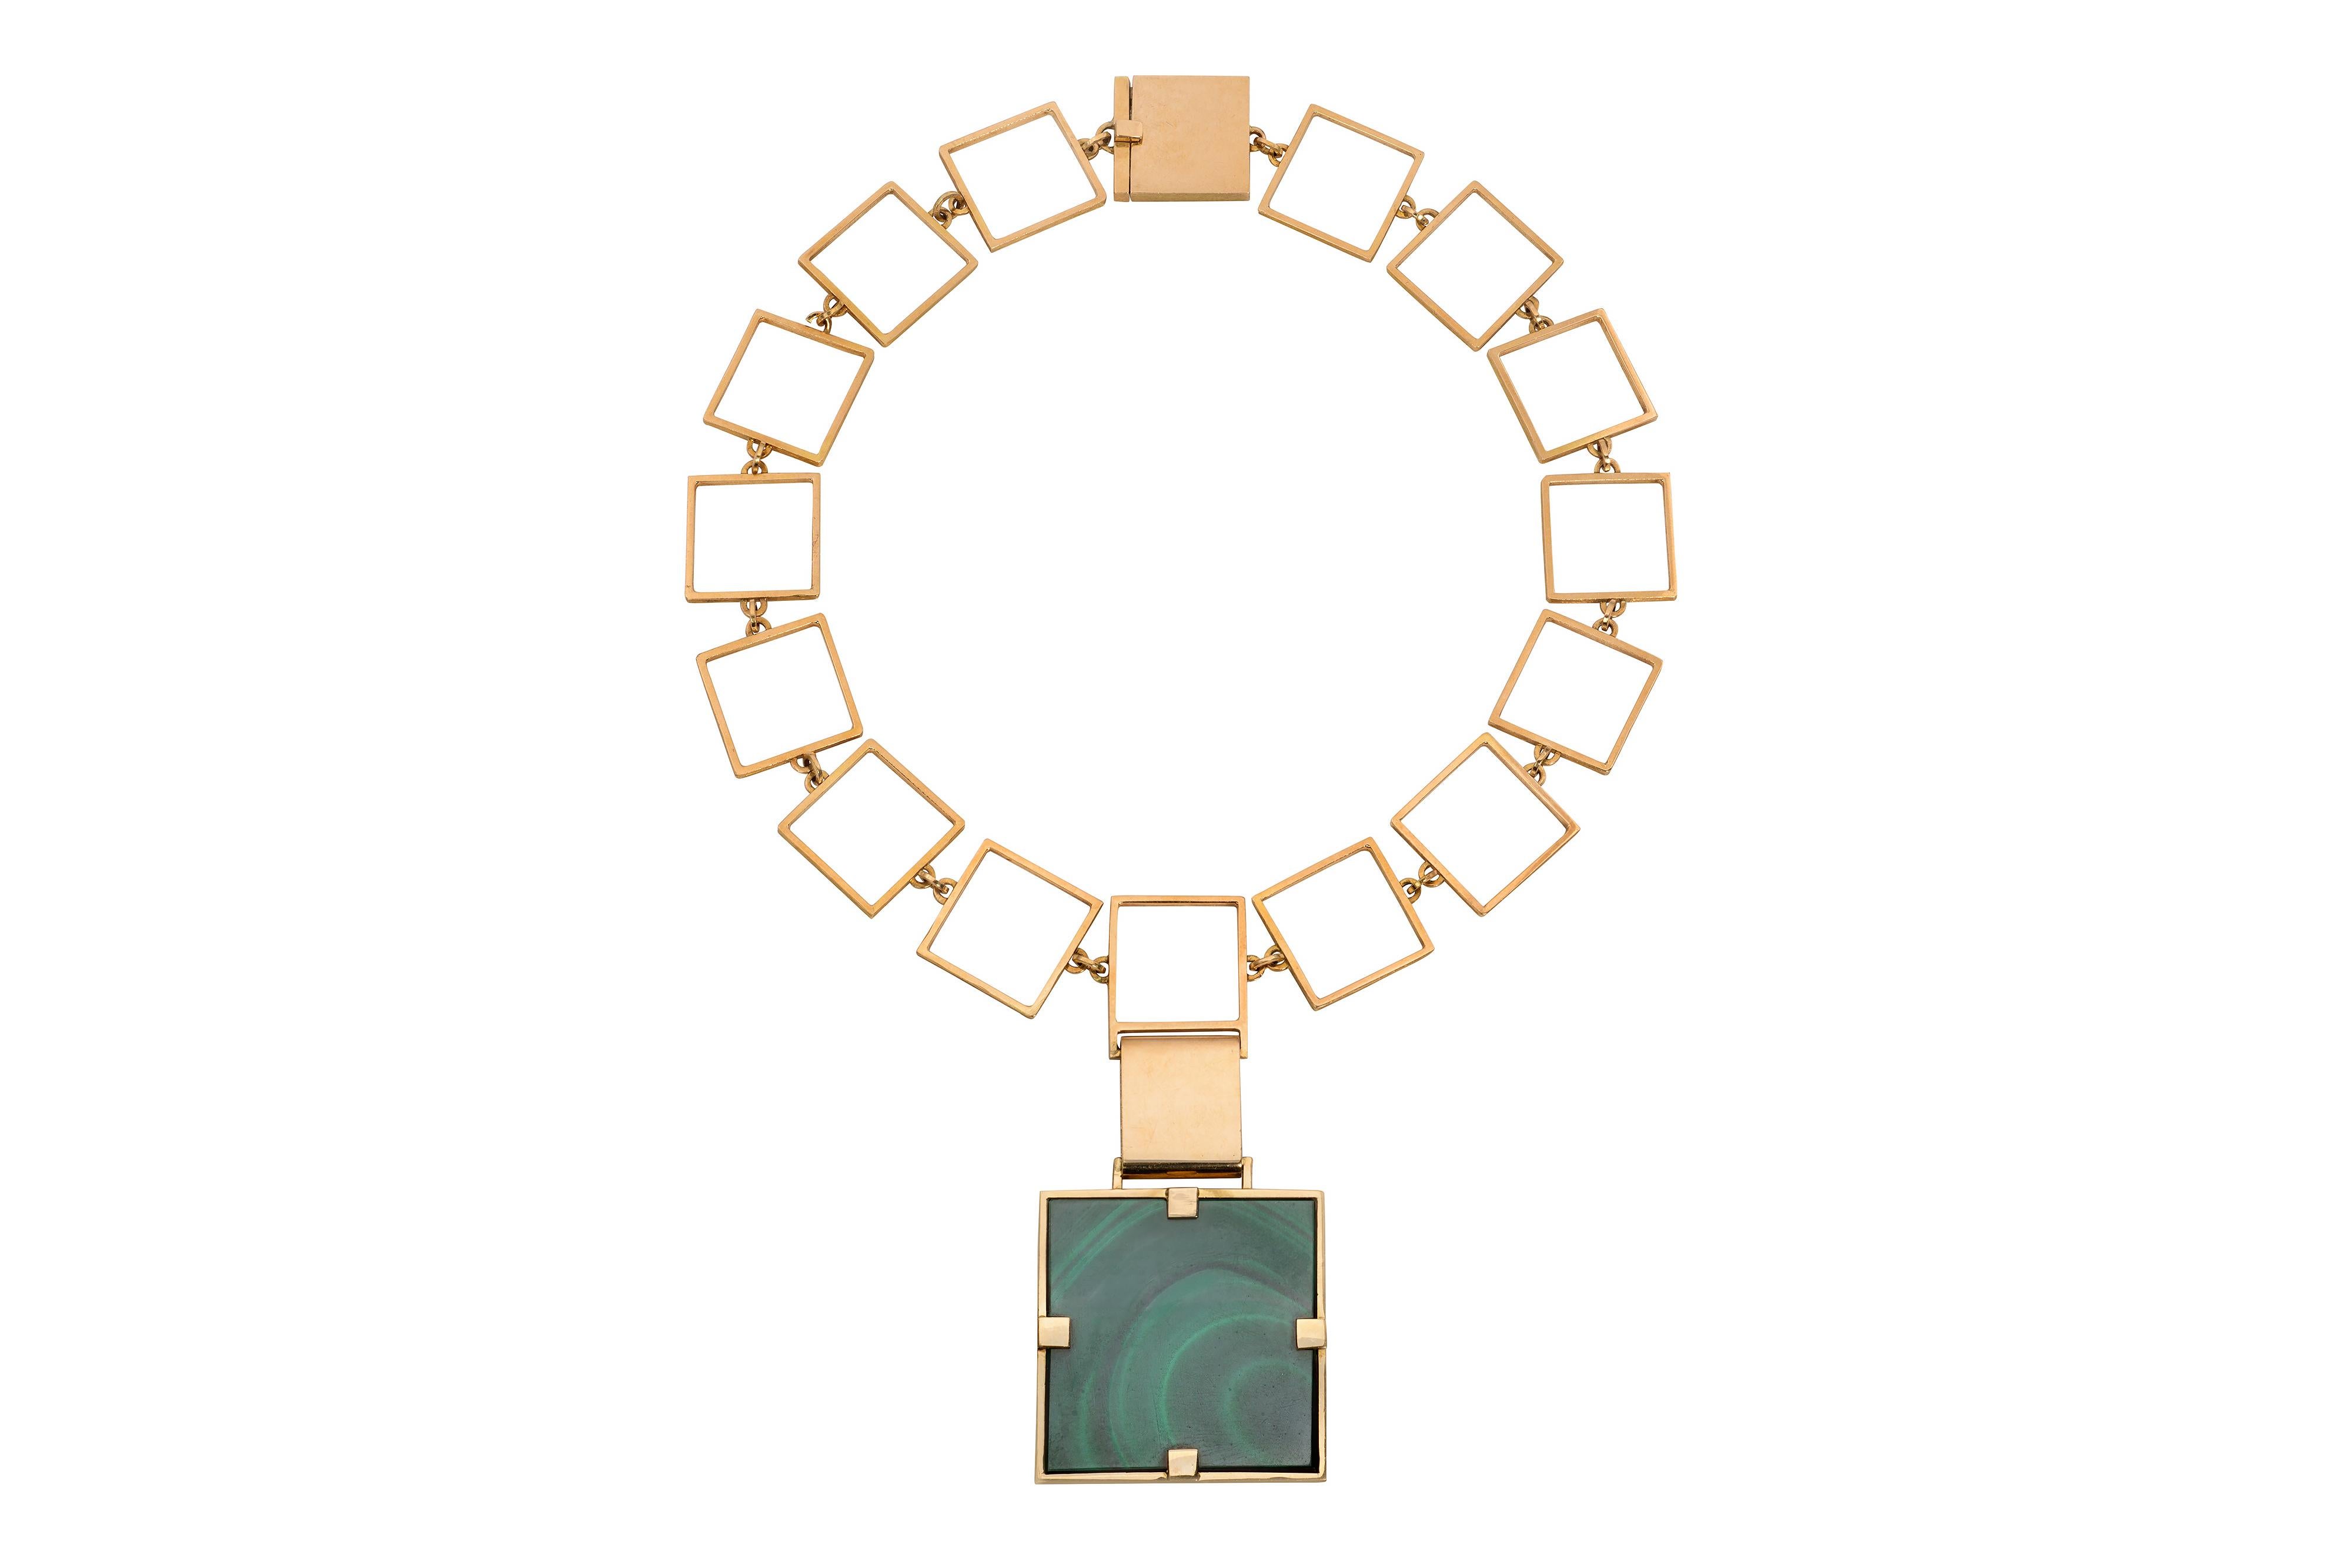 A collectible 18-karat yellow gold and malachite suite comprised of a pair of earrings and a necklace by the important  Canadian modernist jewelry artist, Karl Stittgen. The earrings and necklace are stamped 18K, Stittgen, maker's mark. The necklace